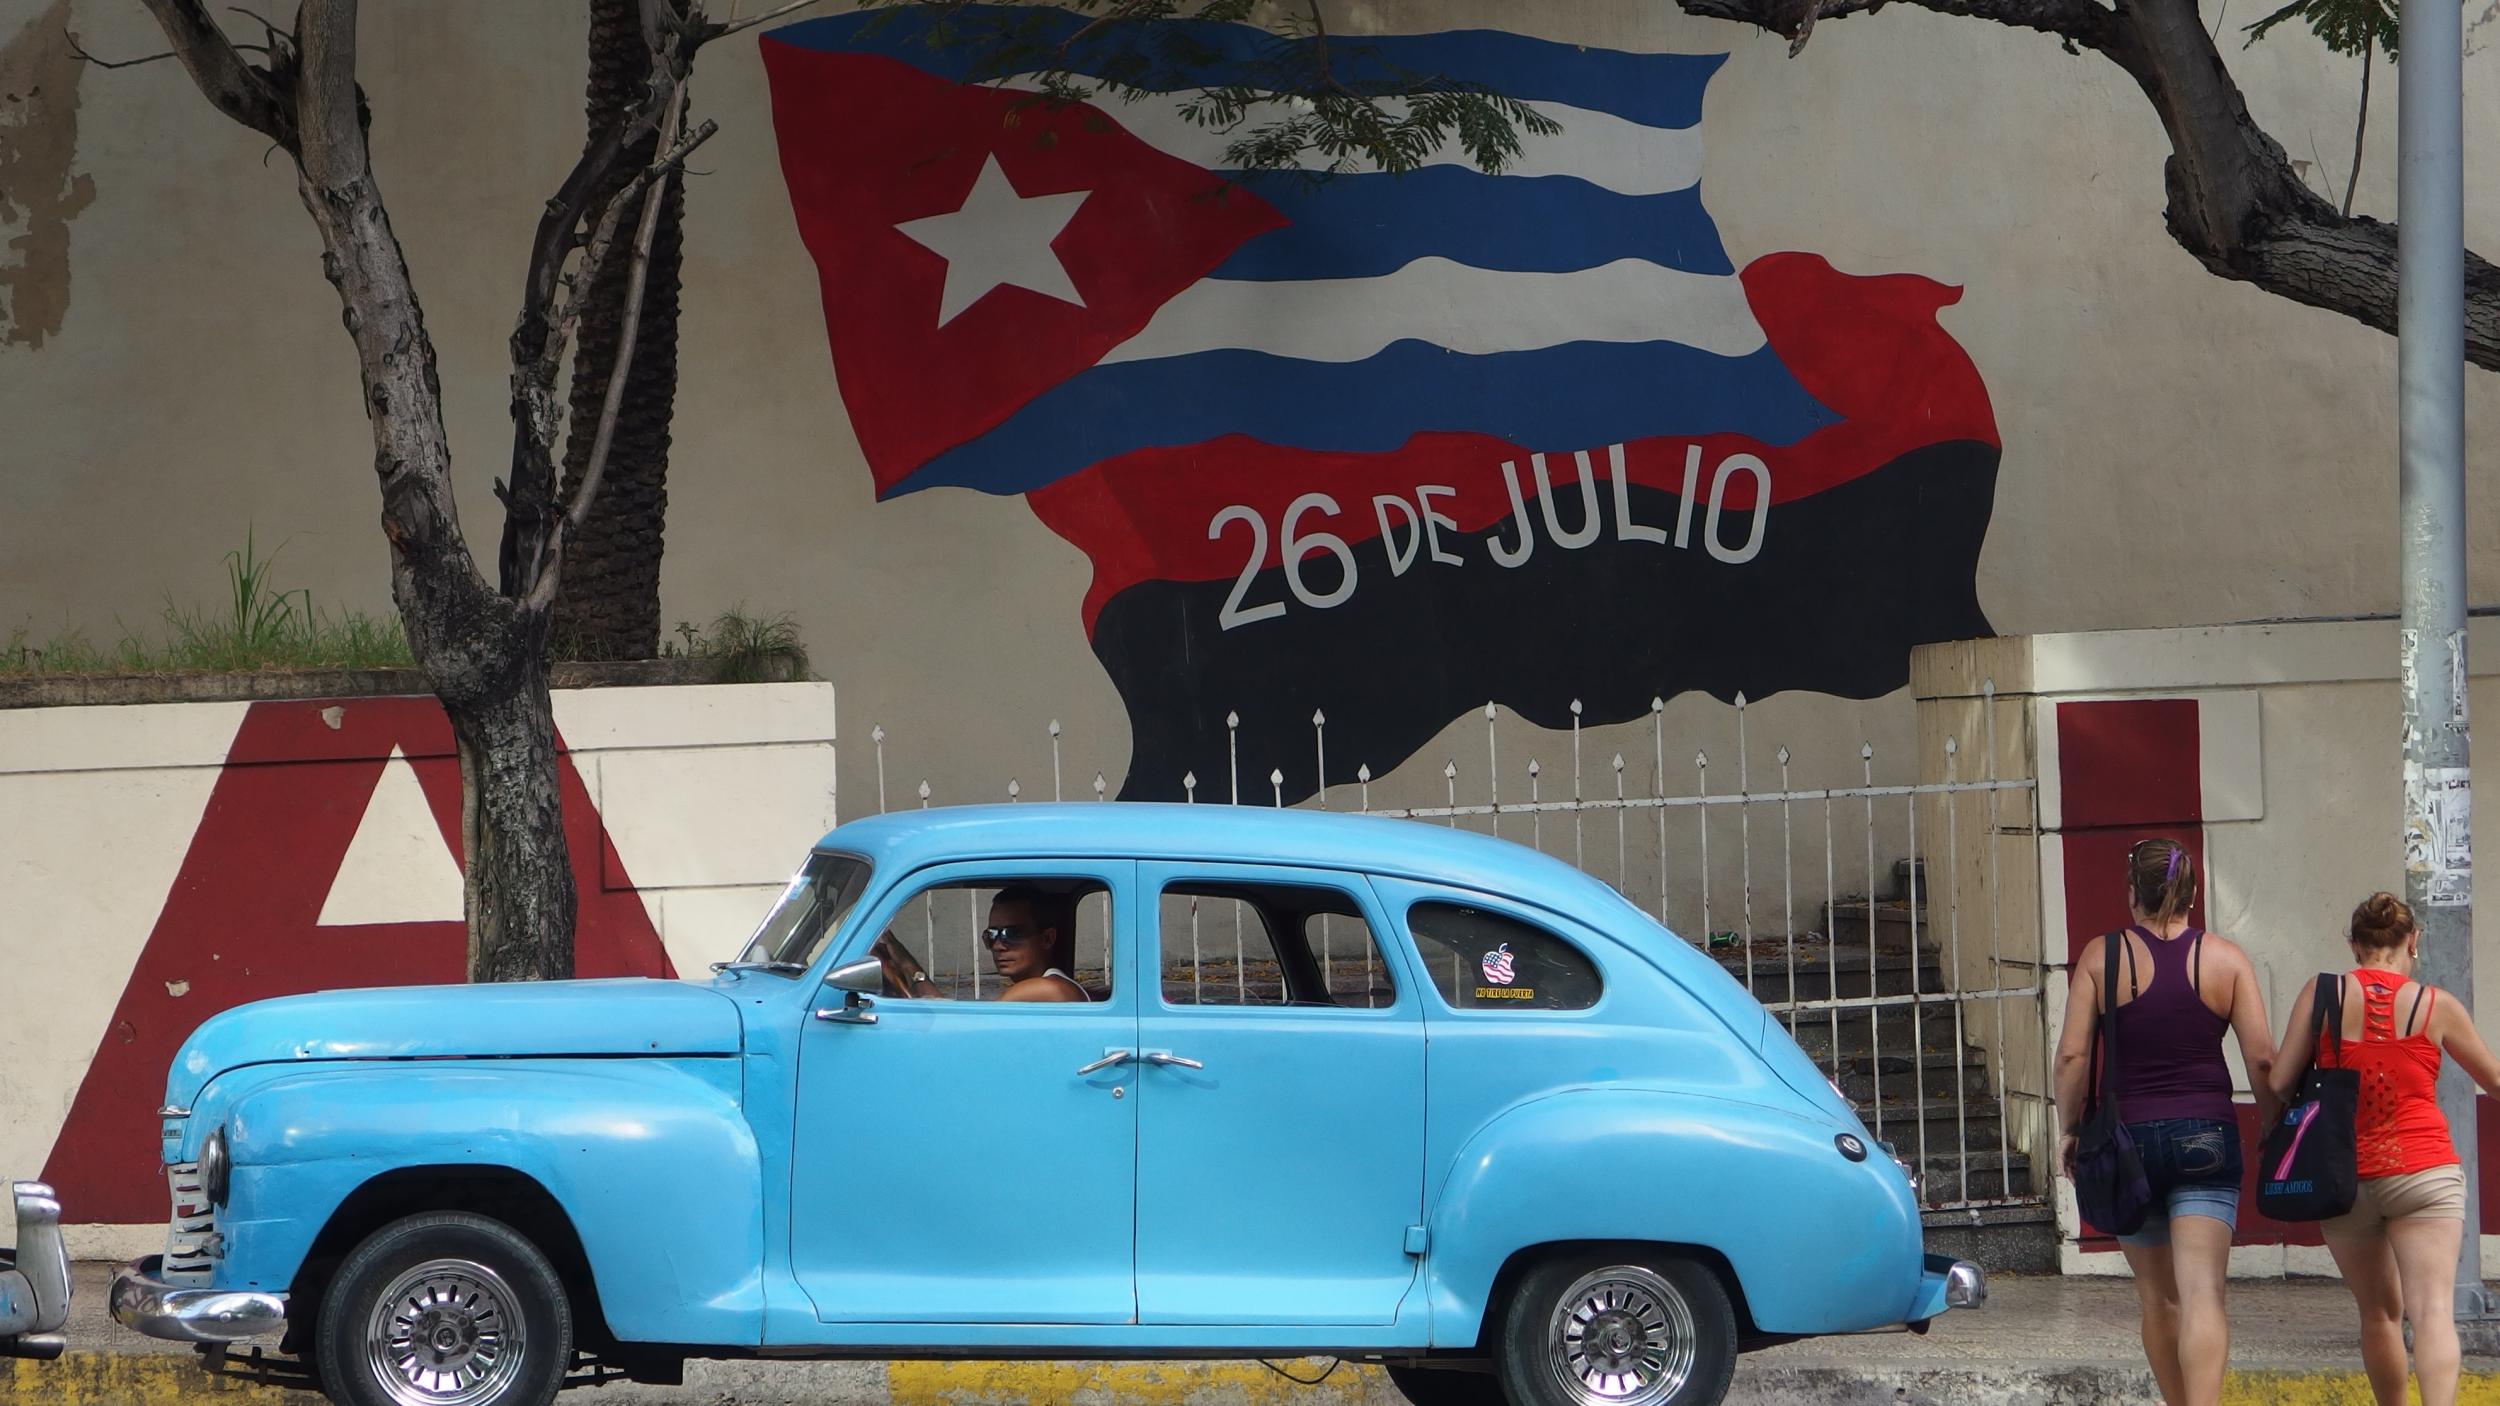 Havana holiday? Cuba is one of many destinations for which disappointed travellers are seeking refunds